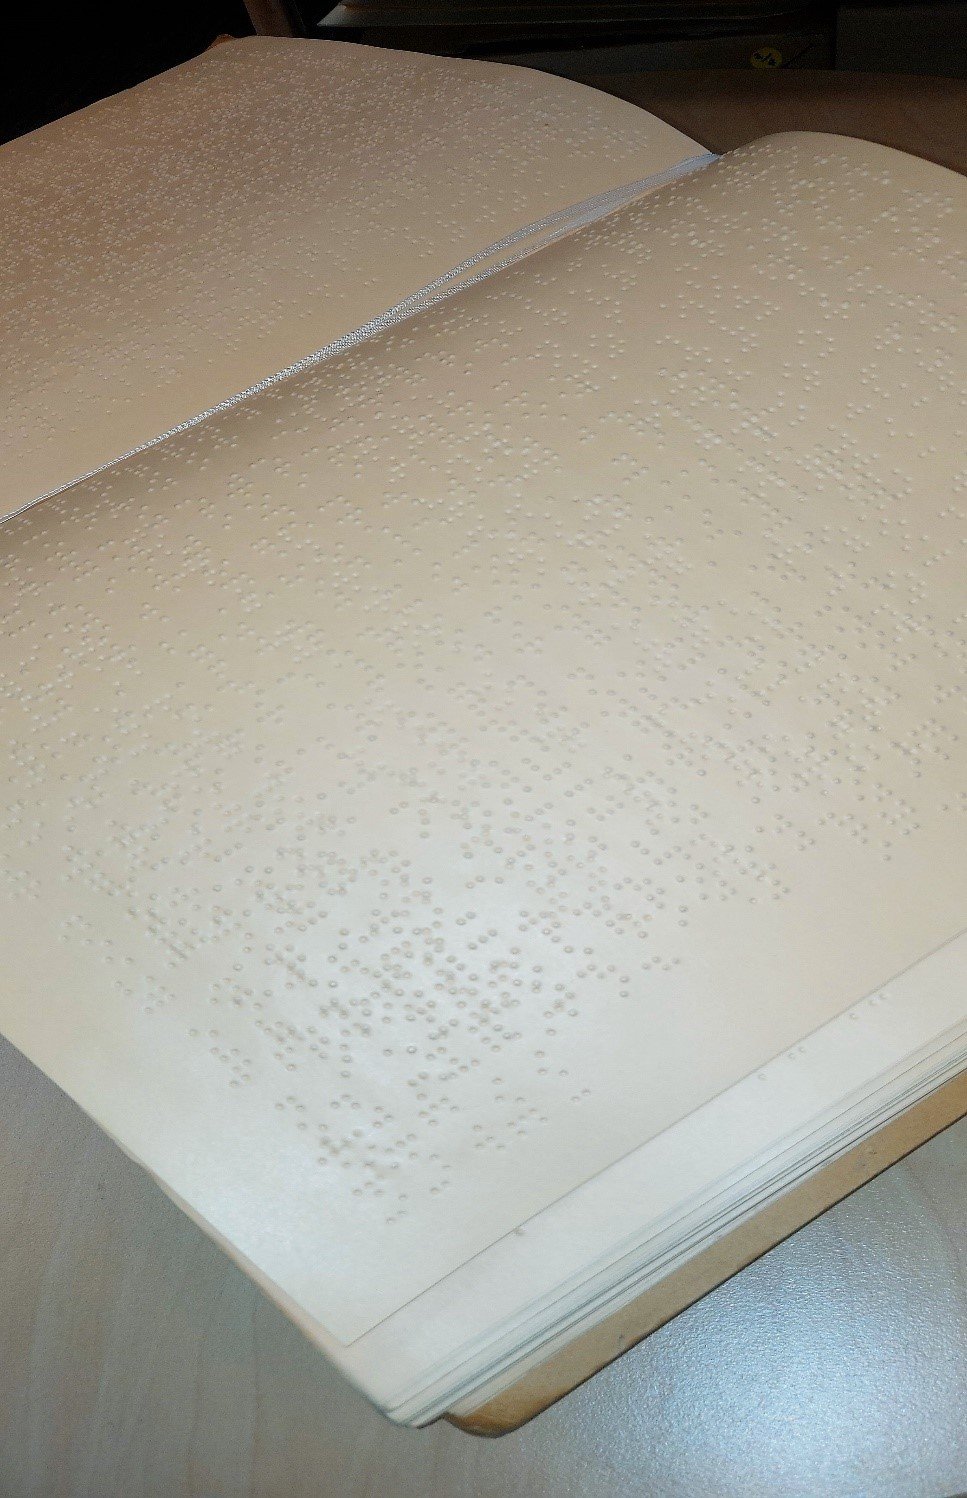 An image of text in braille.